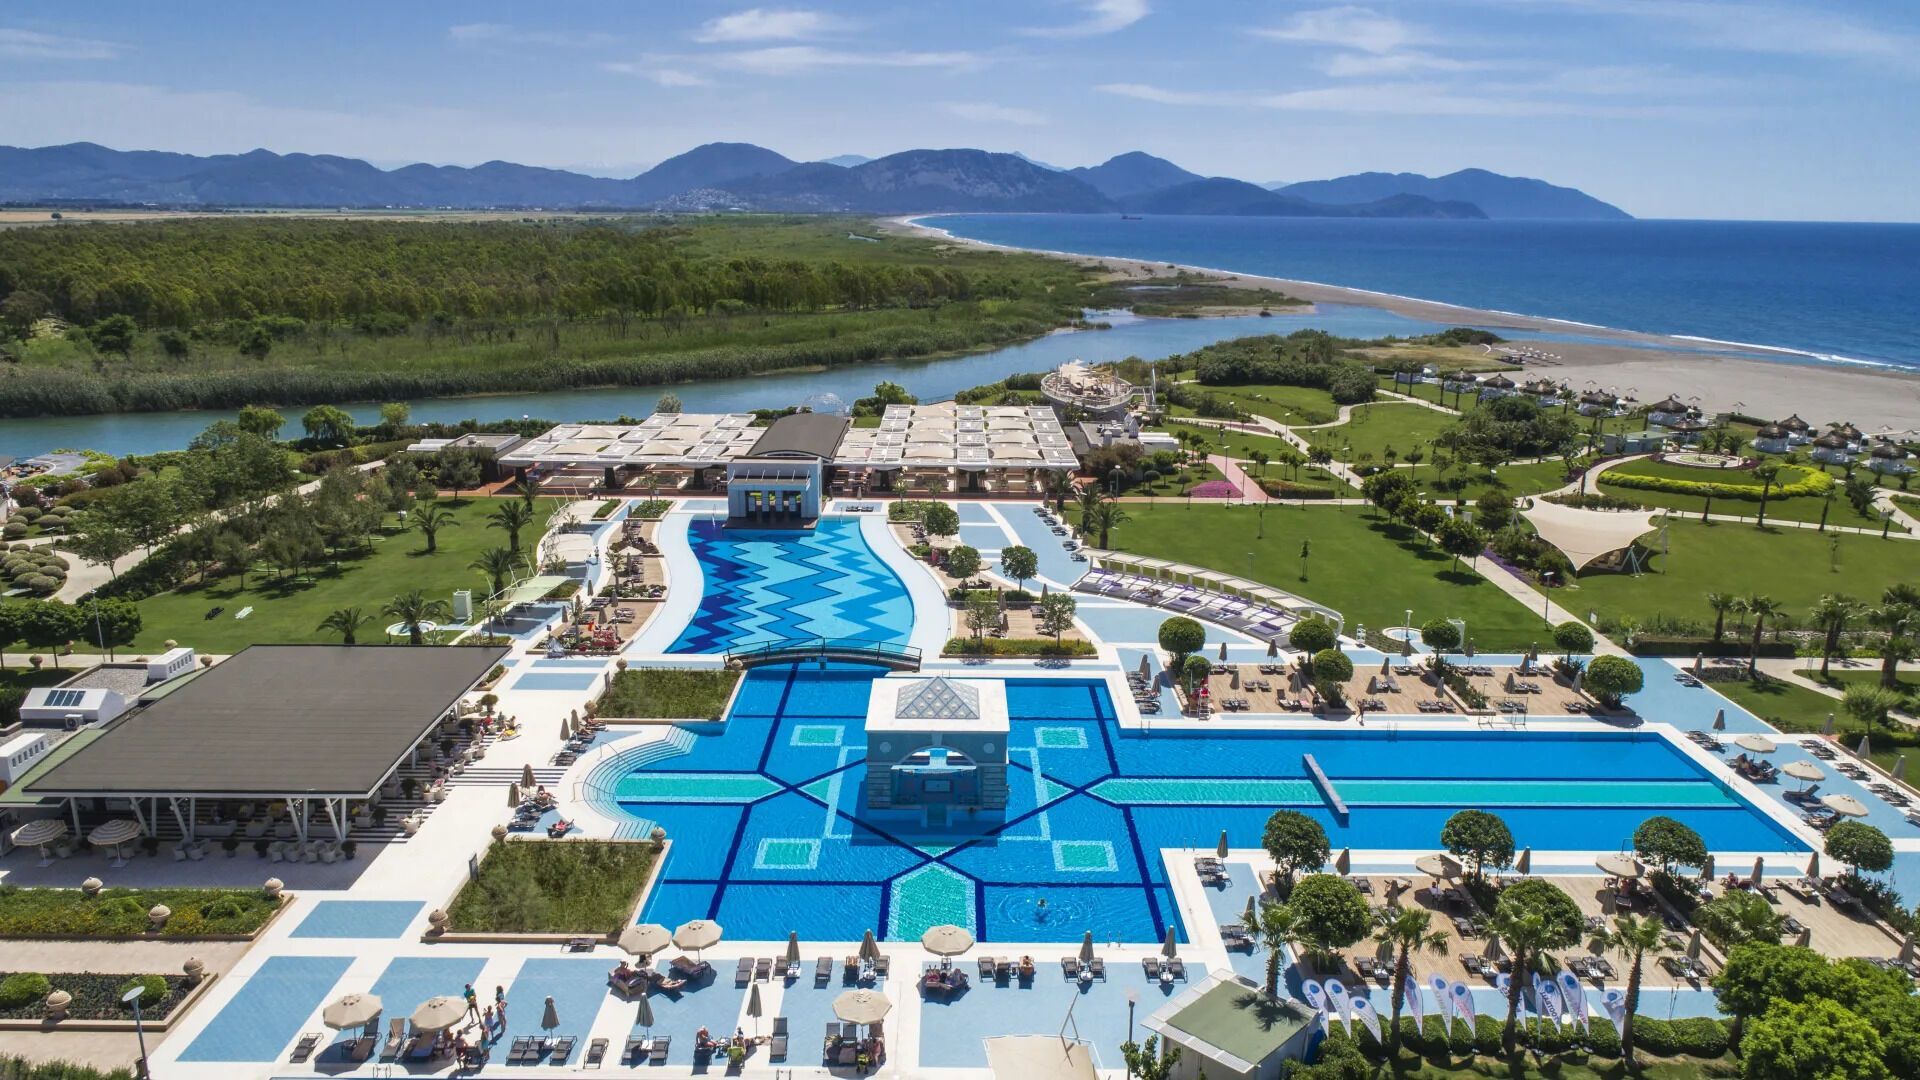 The best all-inclusive Hilton resorts. Hotels where the list of included services will enhance your vacation experience